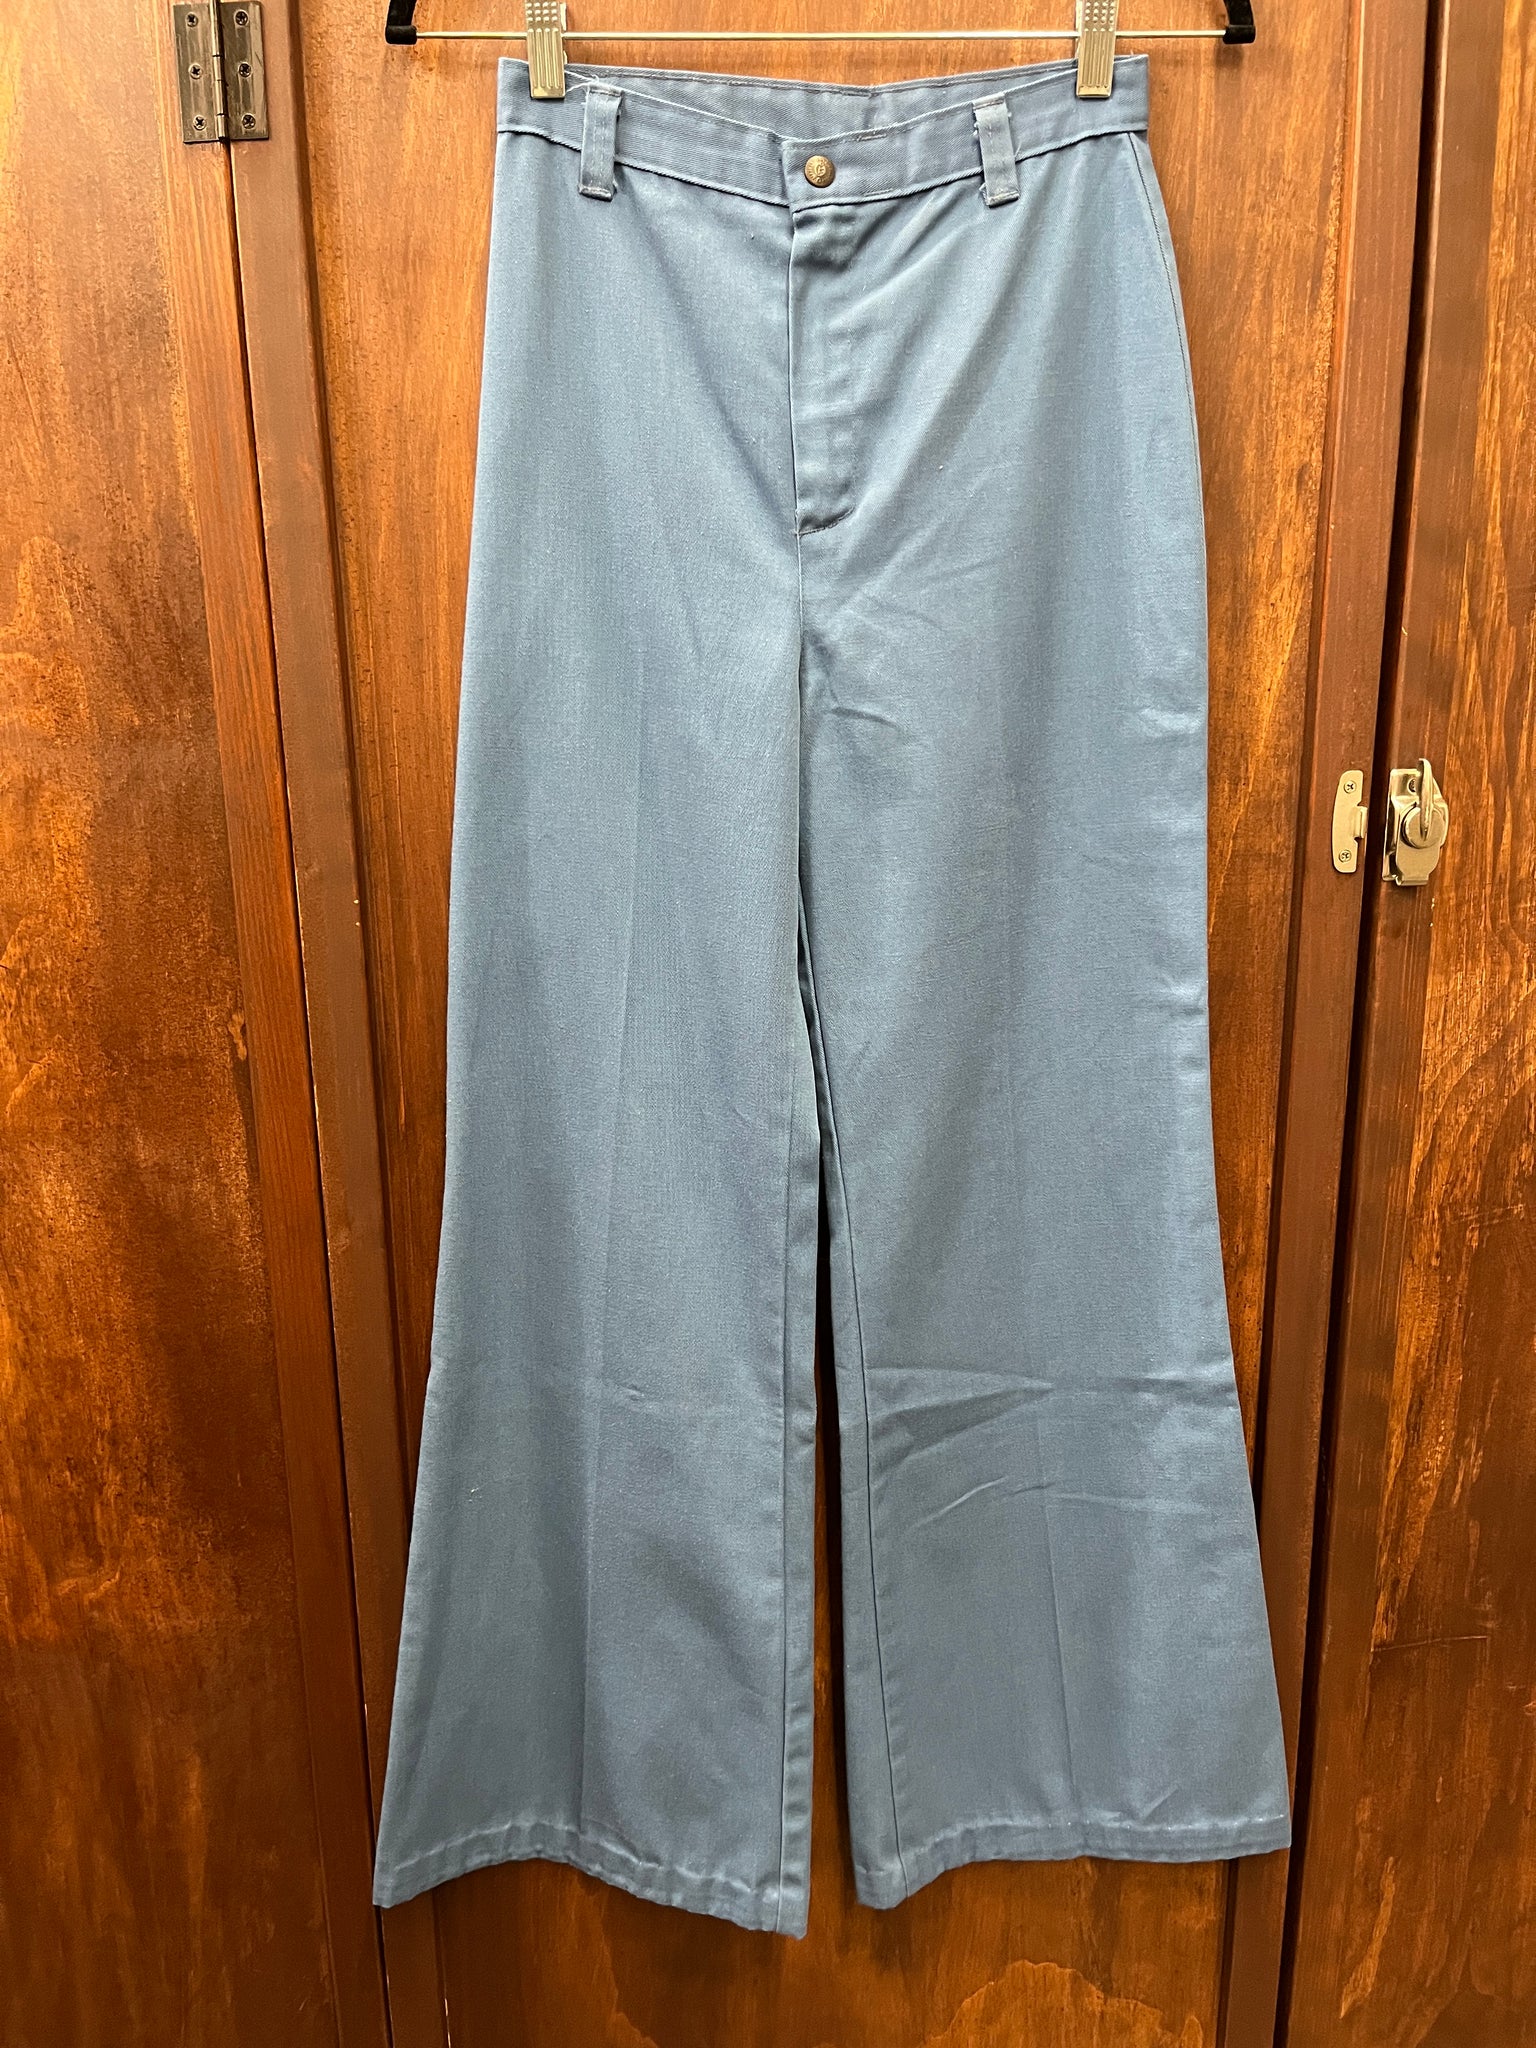 1970s PANTS- Dittos blue bell bottoms